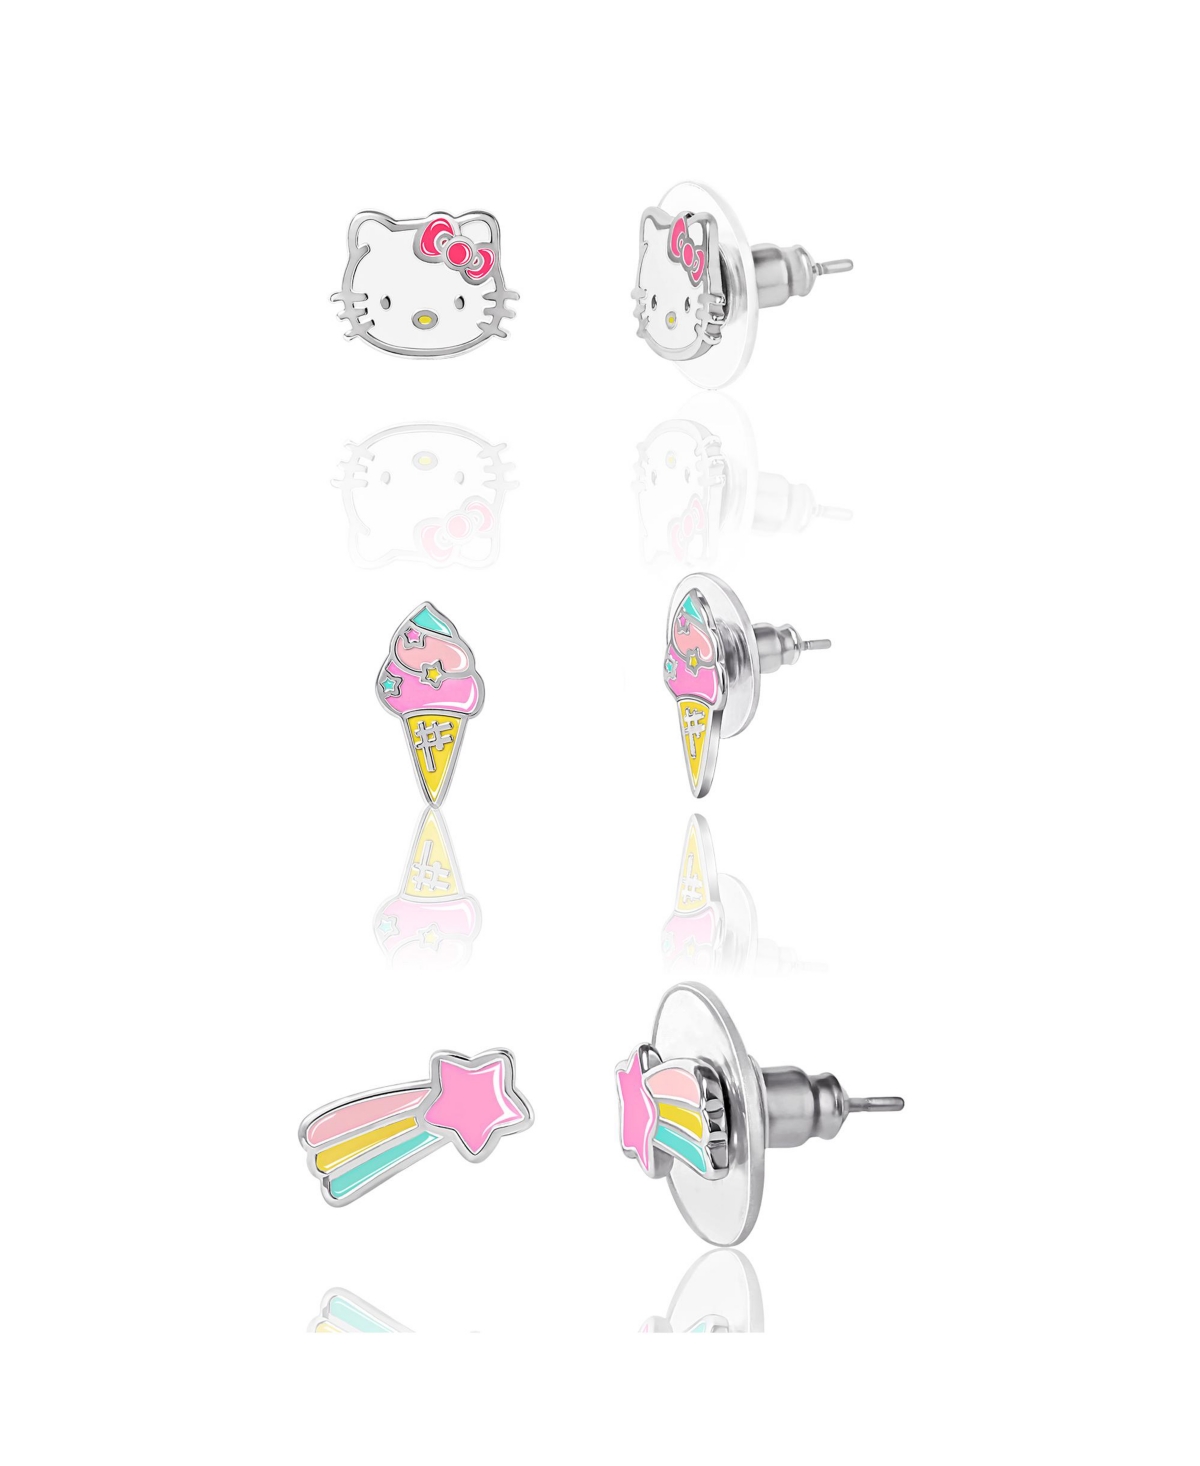 Sanrio Hello Kitty Star, Ice cream Stud Earrings Set - 3 Pairs, Officially Licensed - Pink, blue, yellow